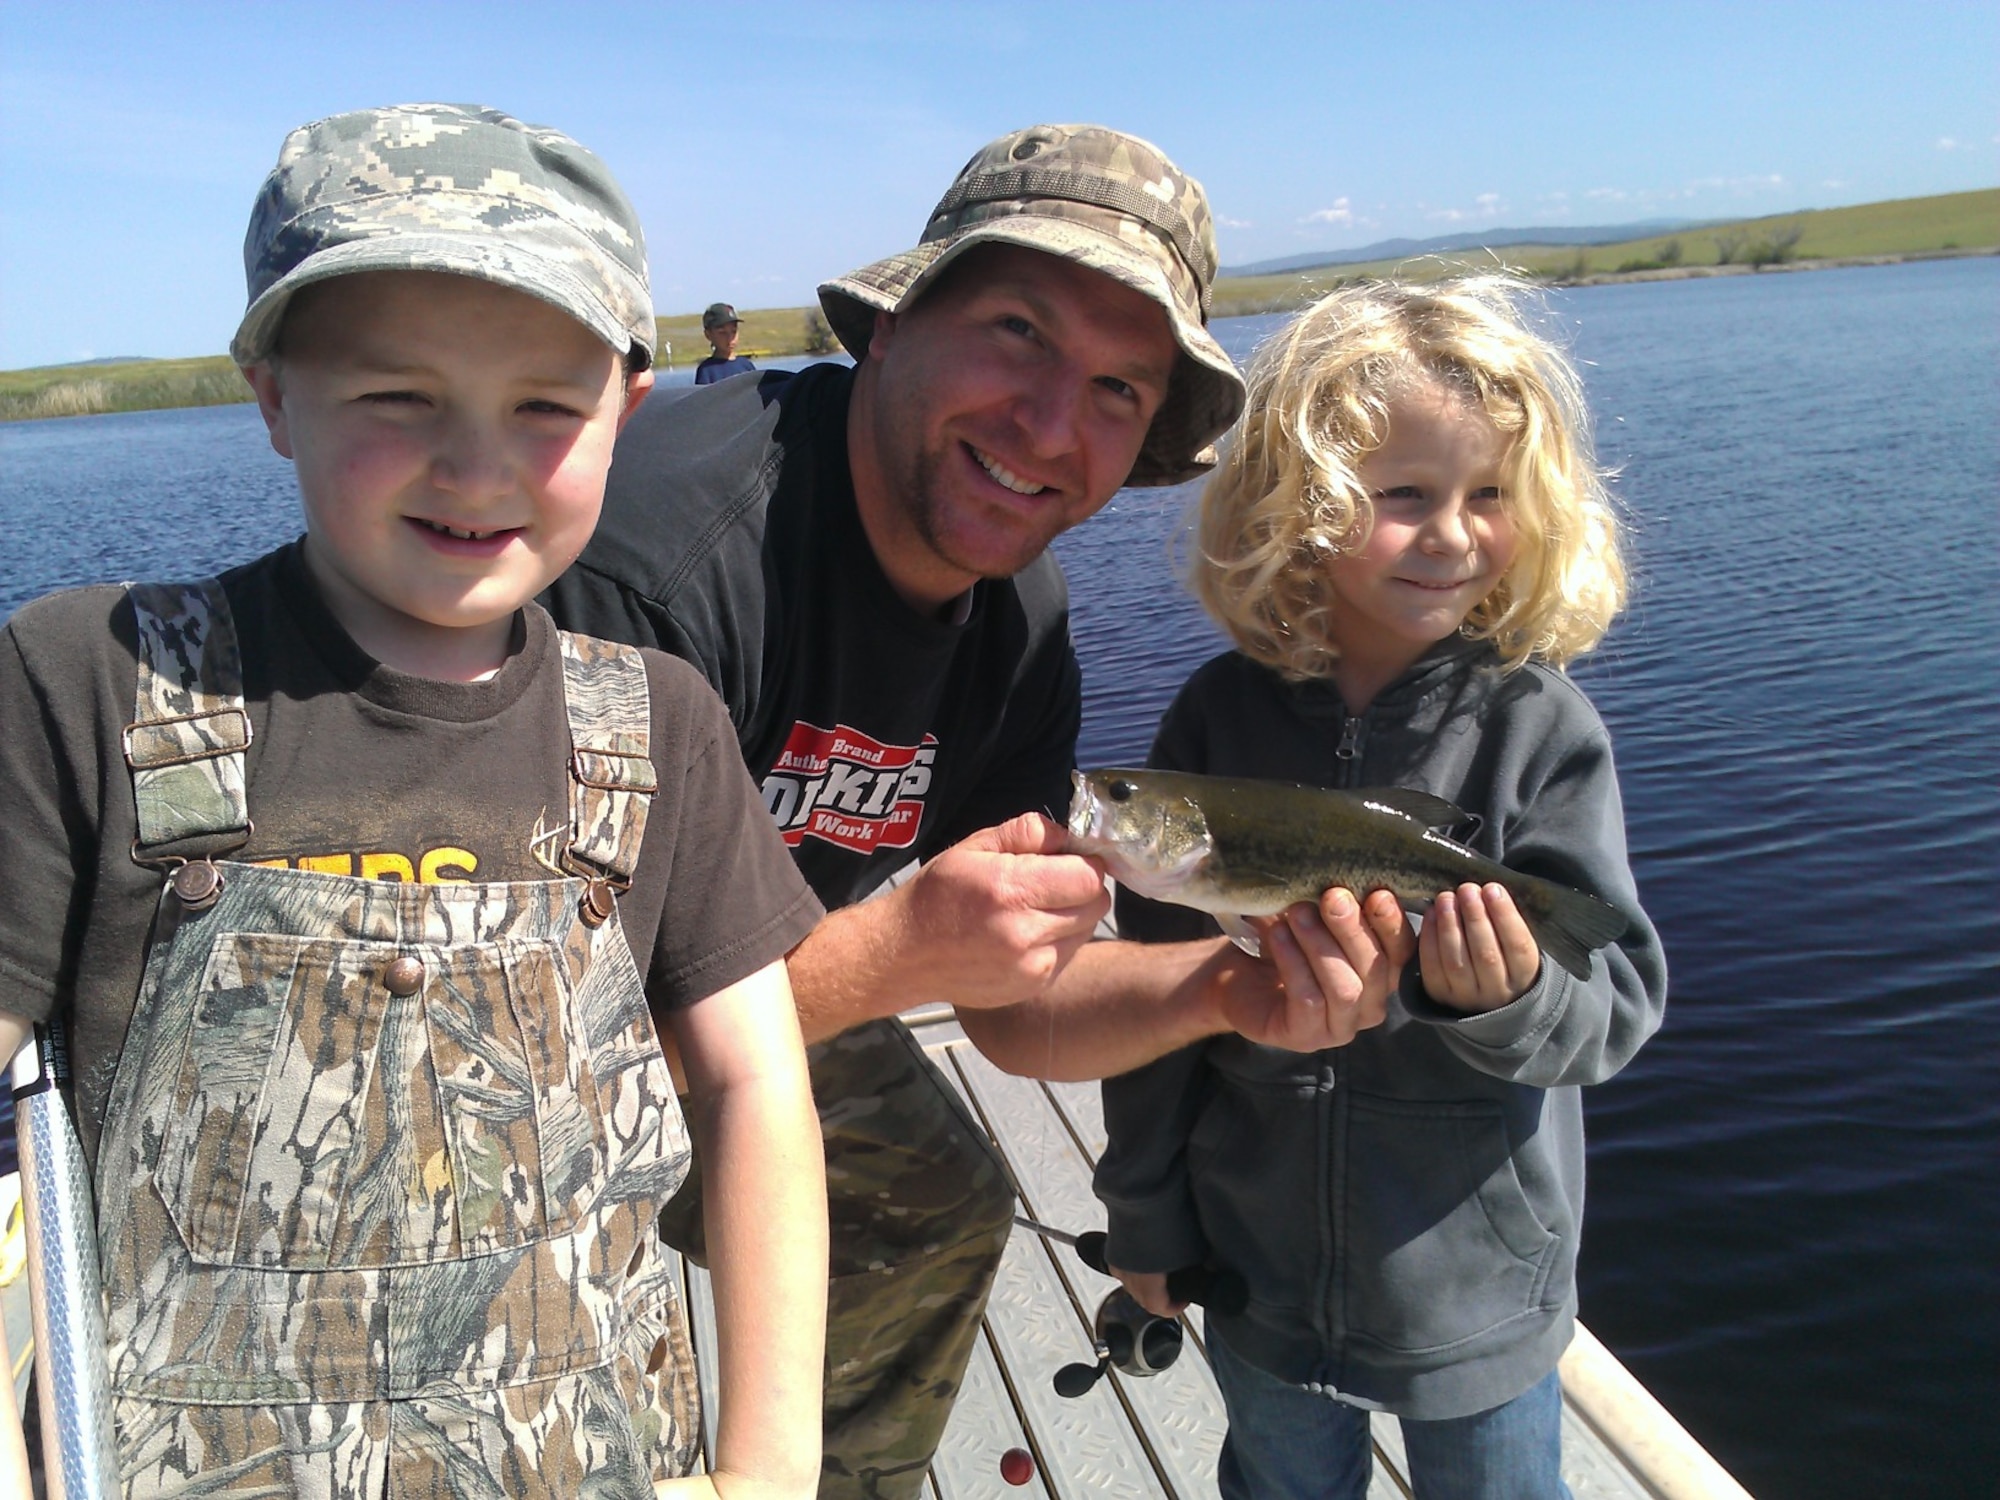 Future anglers pose with their first catch at Beale Air Force Base’s Upper Blackwelder Lake, California. The Air Force recently partnered with the National Park Trust to bring the Buddy Bison Great Outdoors Challenge to military families at several installations. The program encourages children and families to spend less time in front of a screen and more time outdoors. (Courtesy photo)